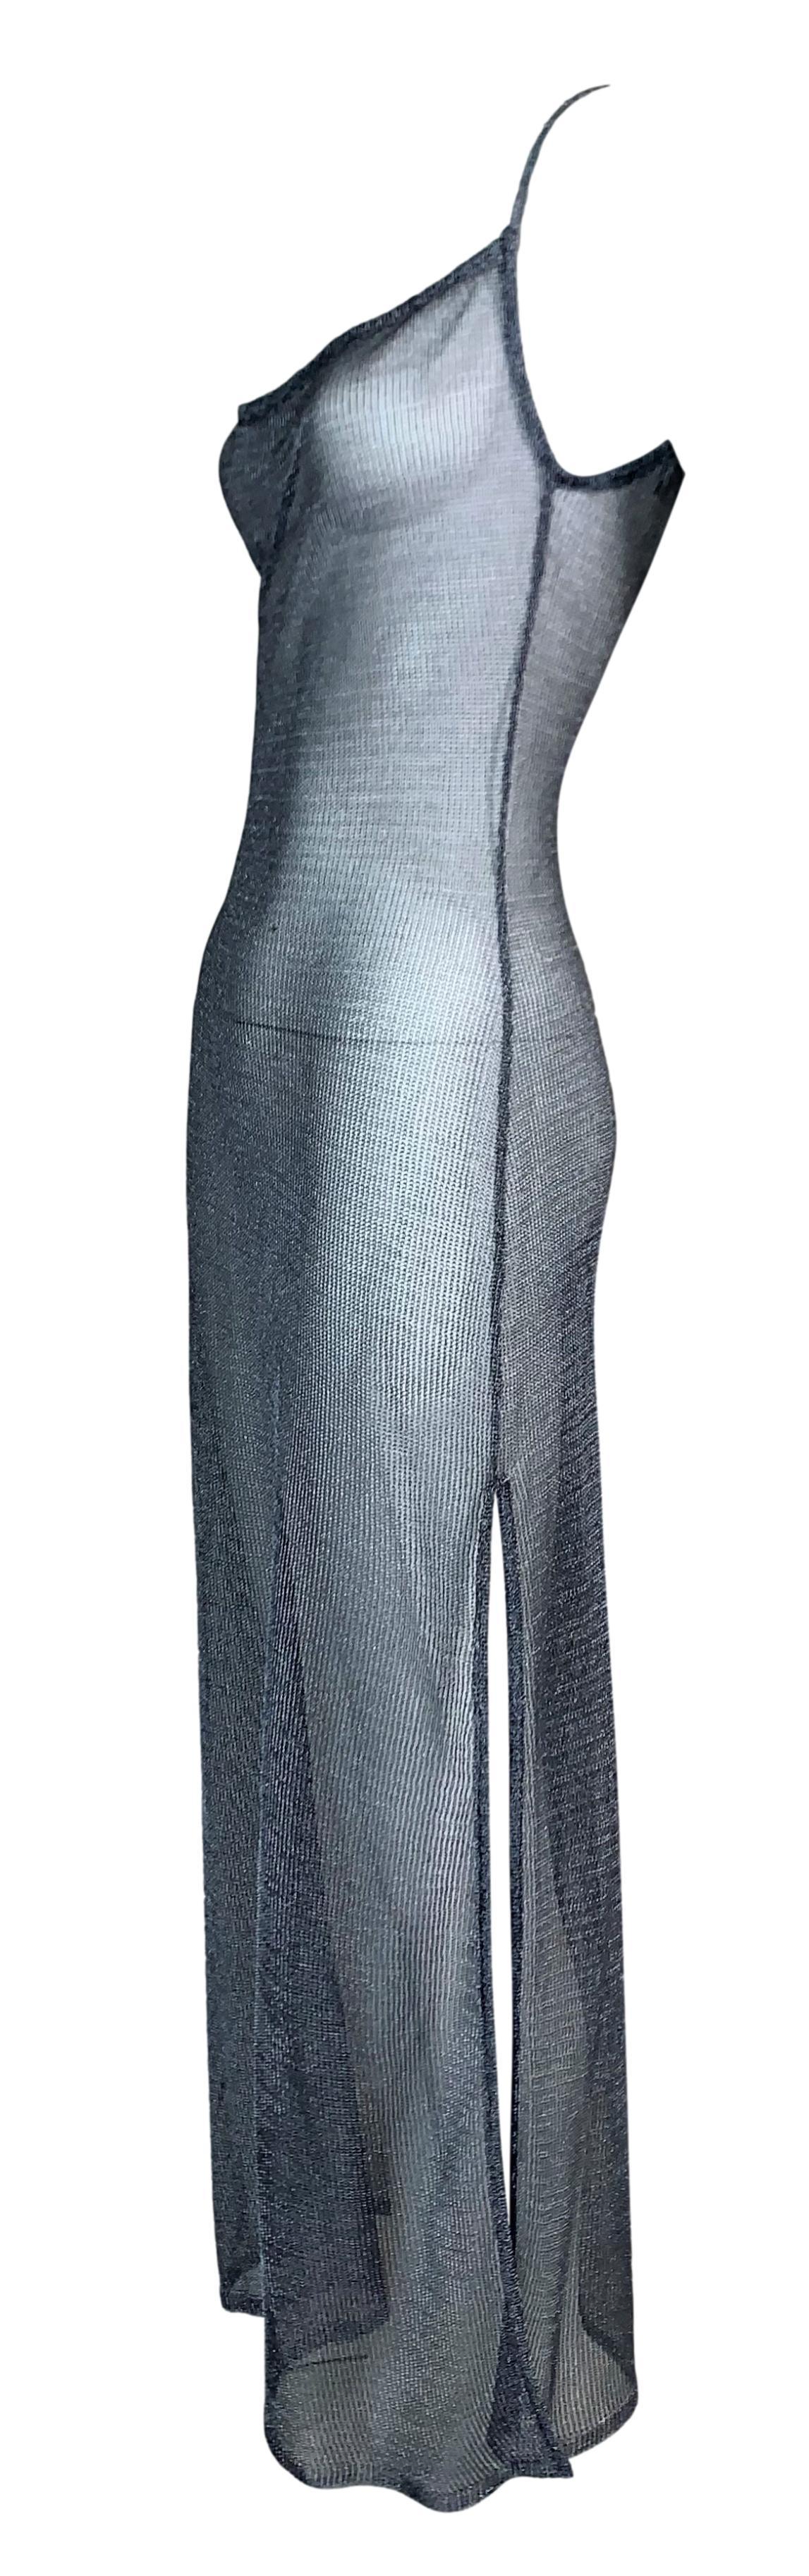 **THANK YOU FOR SHOPPING WITH MES DEUX FILLES**

DESIGNER: S/S 2001 John Galliano- metallic coated threading making it lighter than chainmail but its looks like chainmail
CONDITION: Good- light wear, no holes or stains
MATERIAL: Acetate & Polyester-